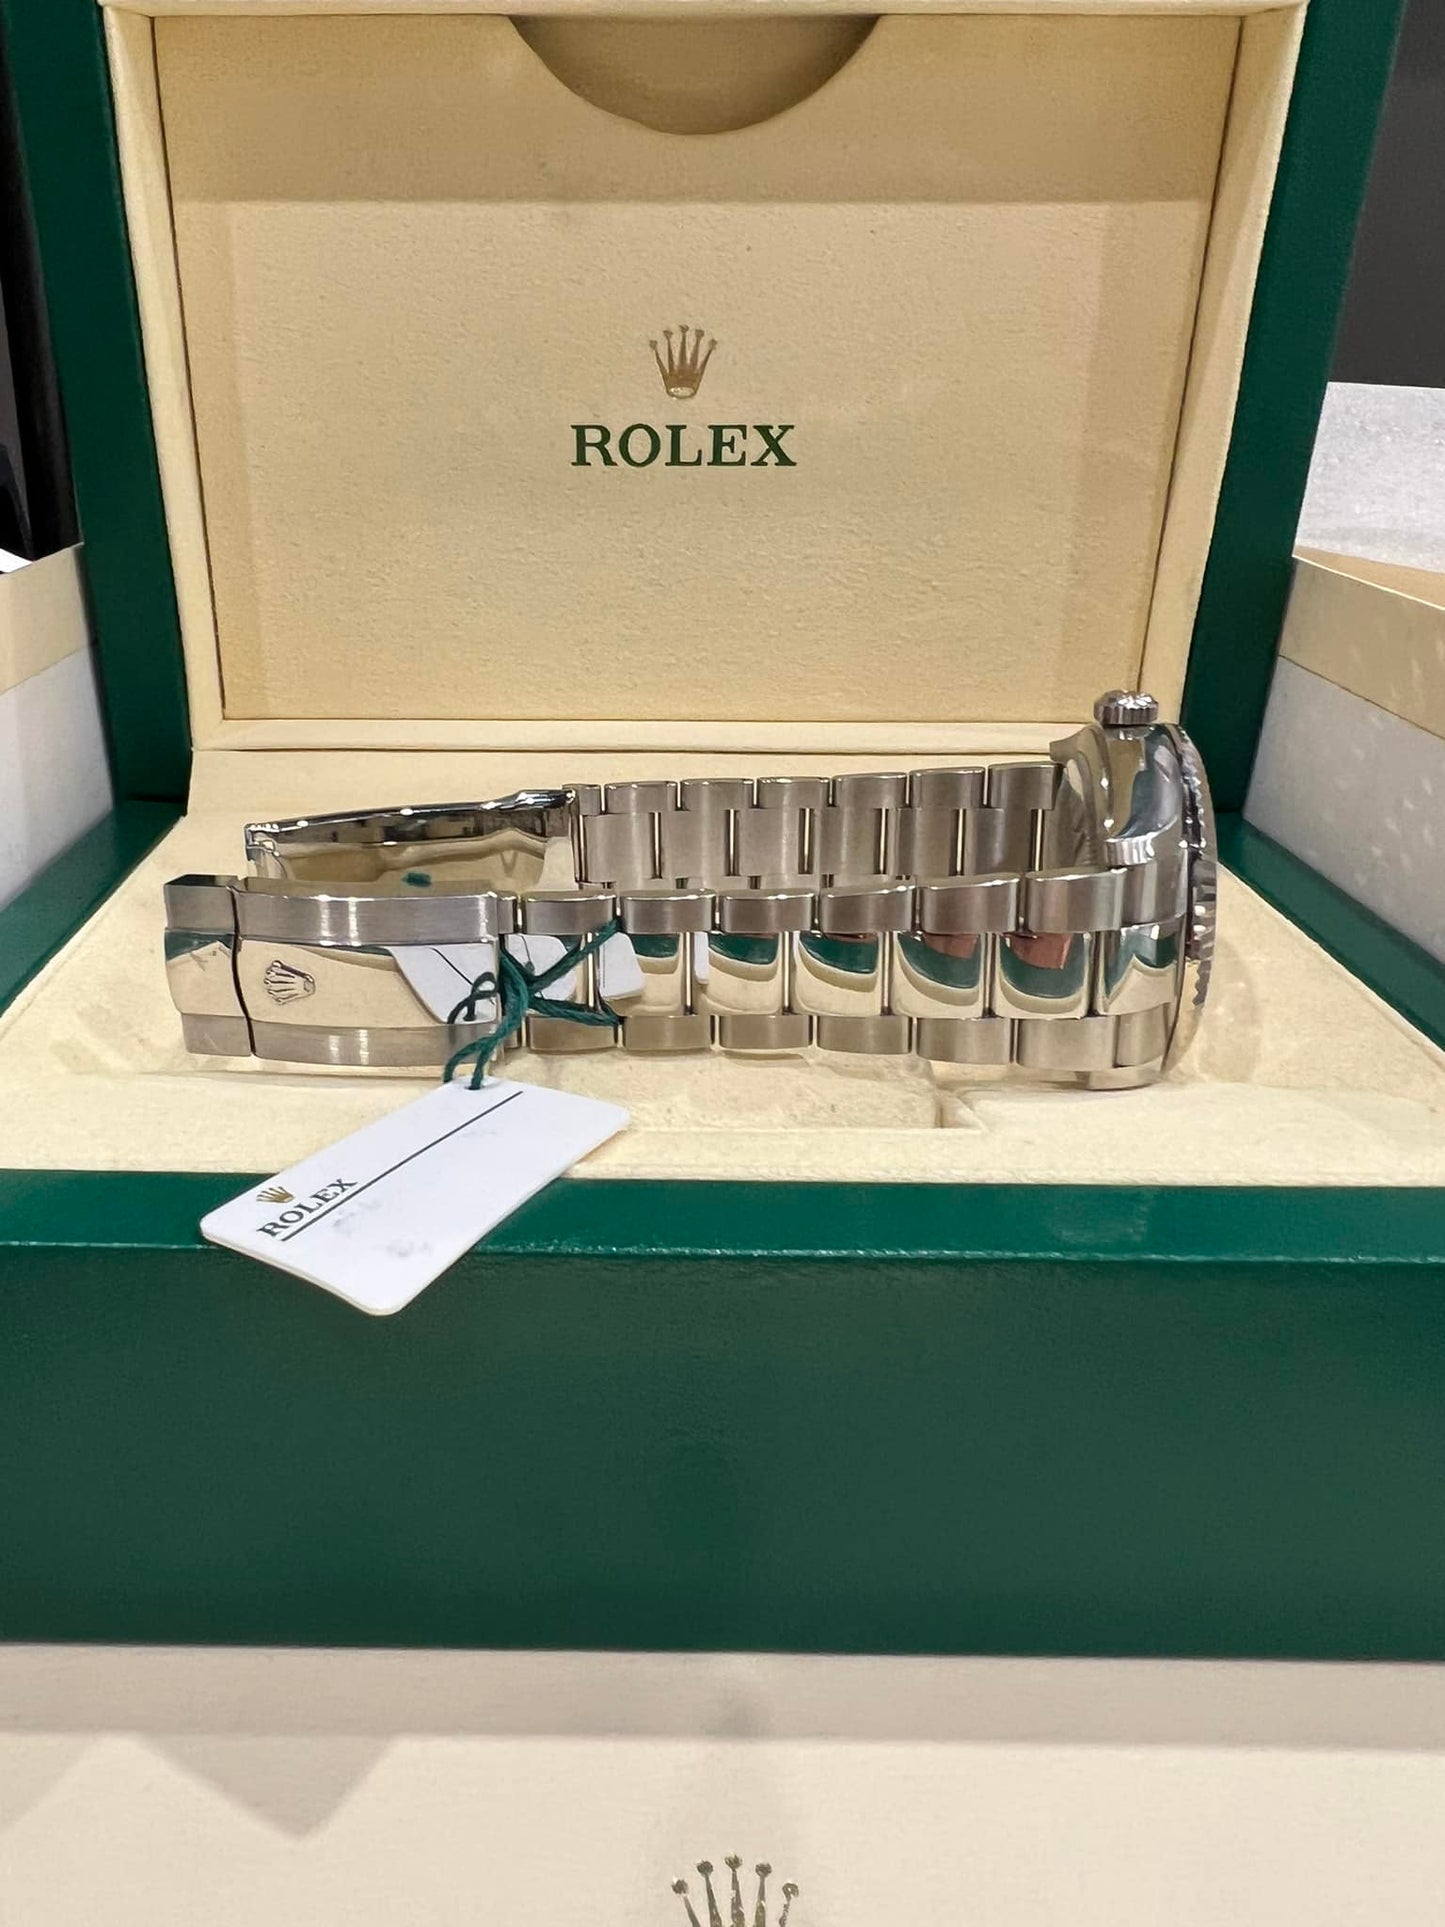 ROLEX STEEL SKY-DWELLER 32693 42MM WHIITE DIAL Box +Papers